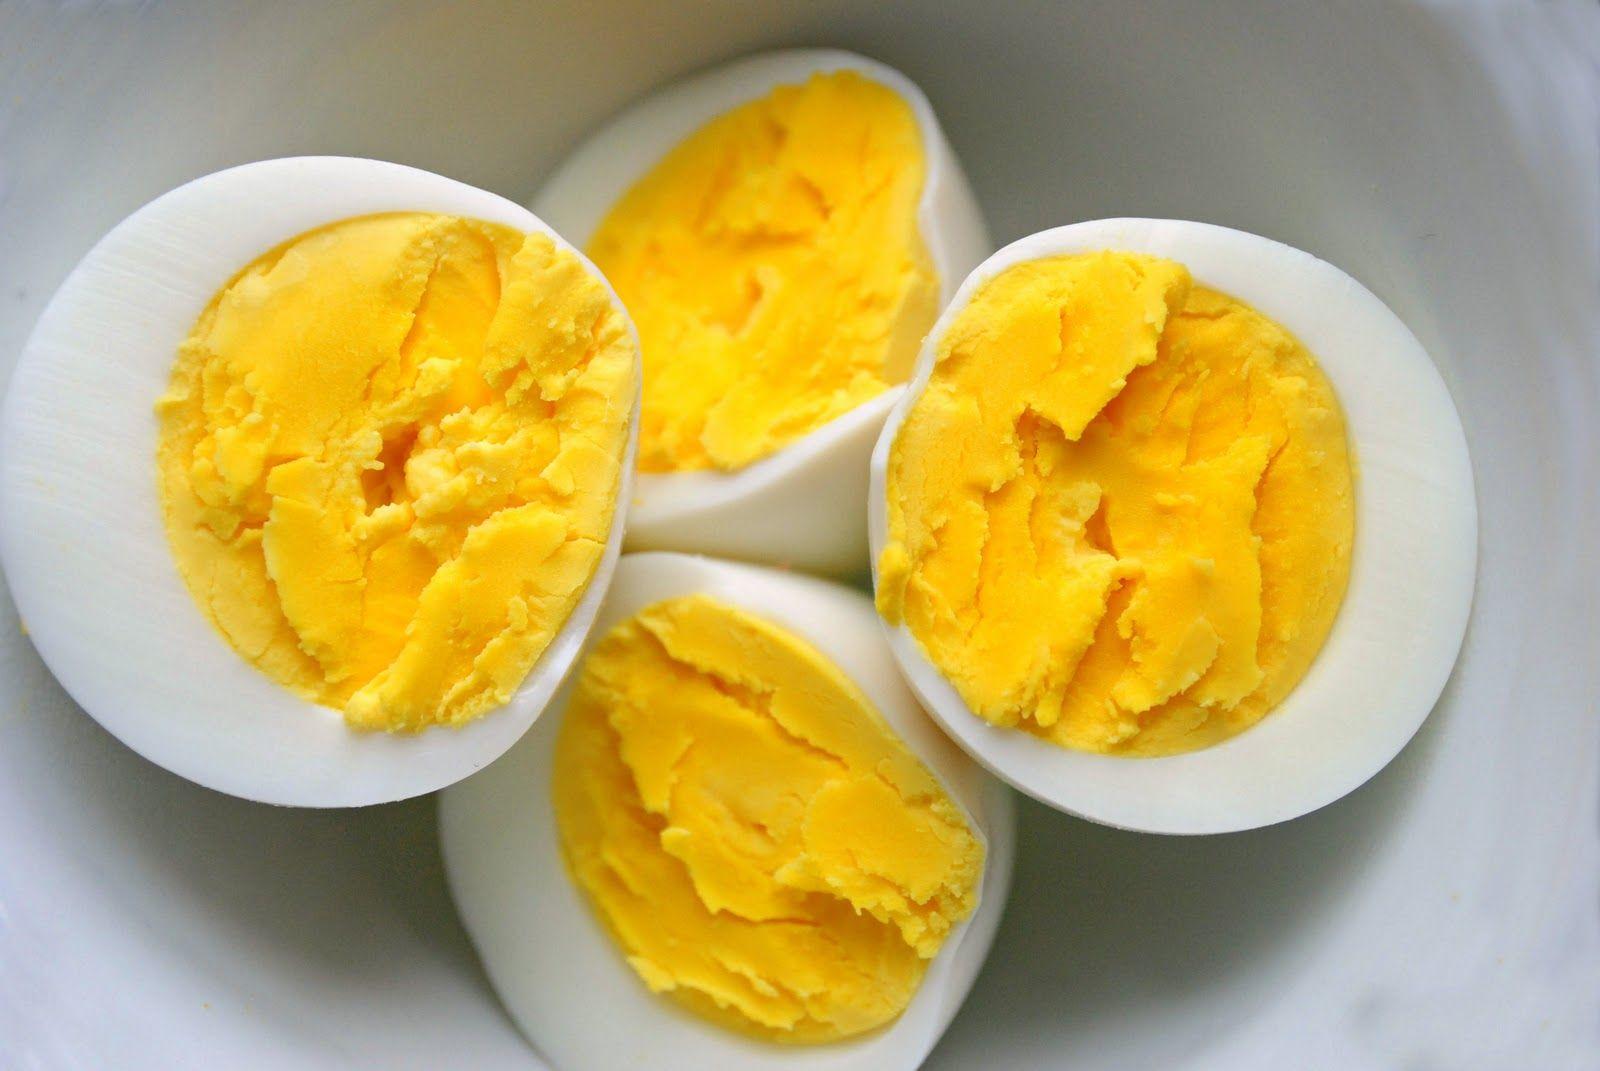 How I Lost 12 Pounds in One Week With This Weird Egg Diet